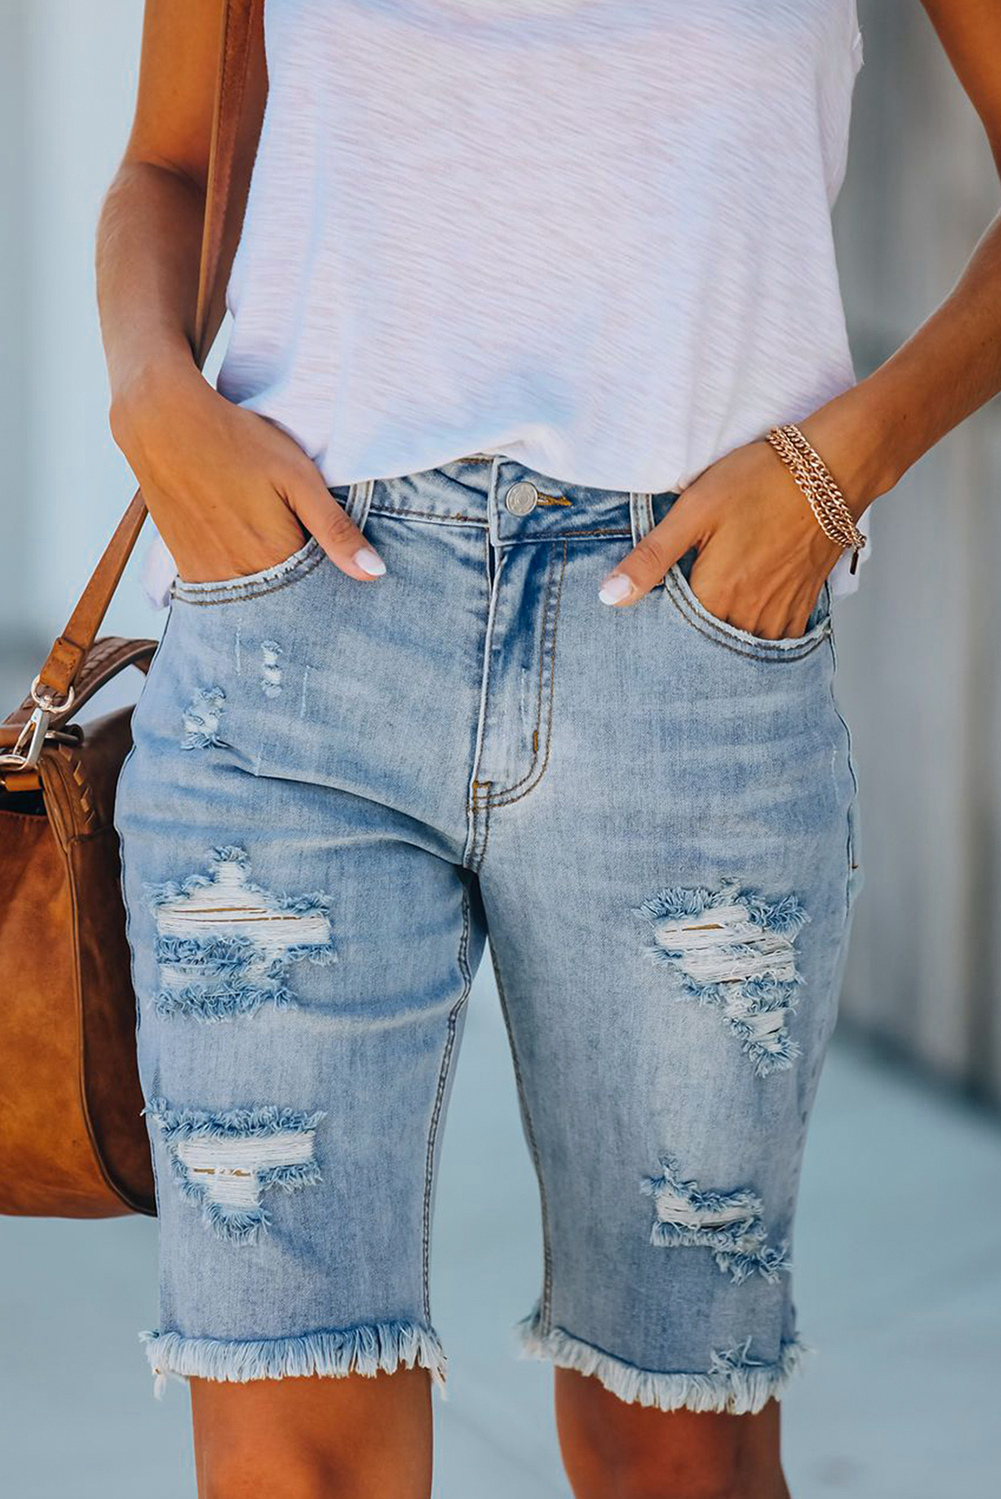 Shewin Wholesale Clothes Light Blue Distressed Ripped Denim Bermuda SHORTS